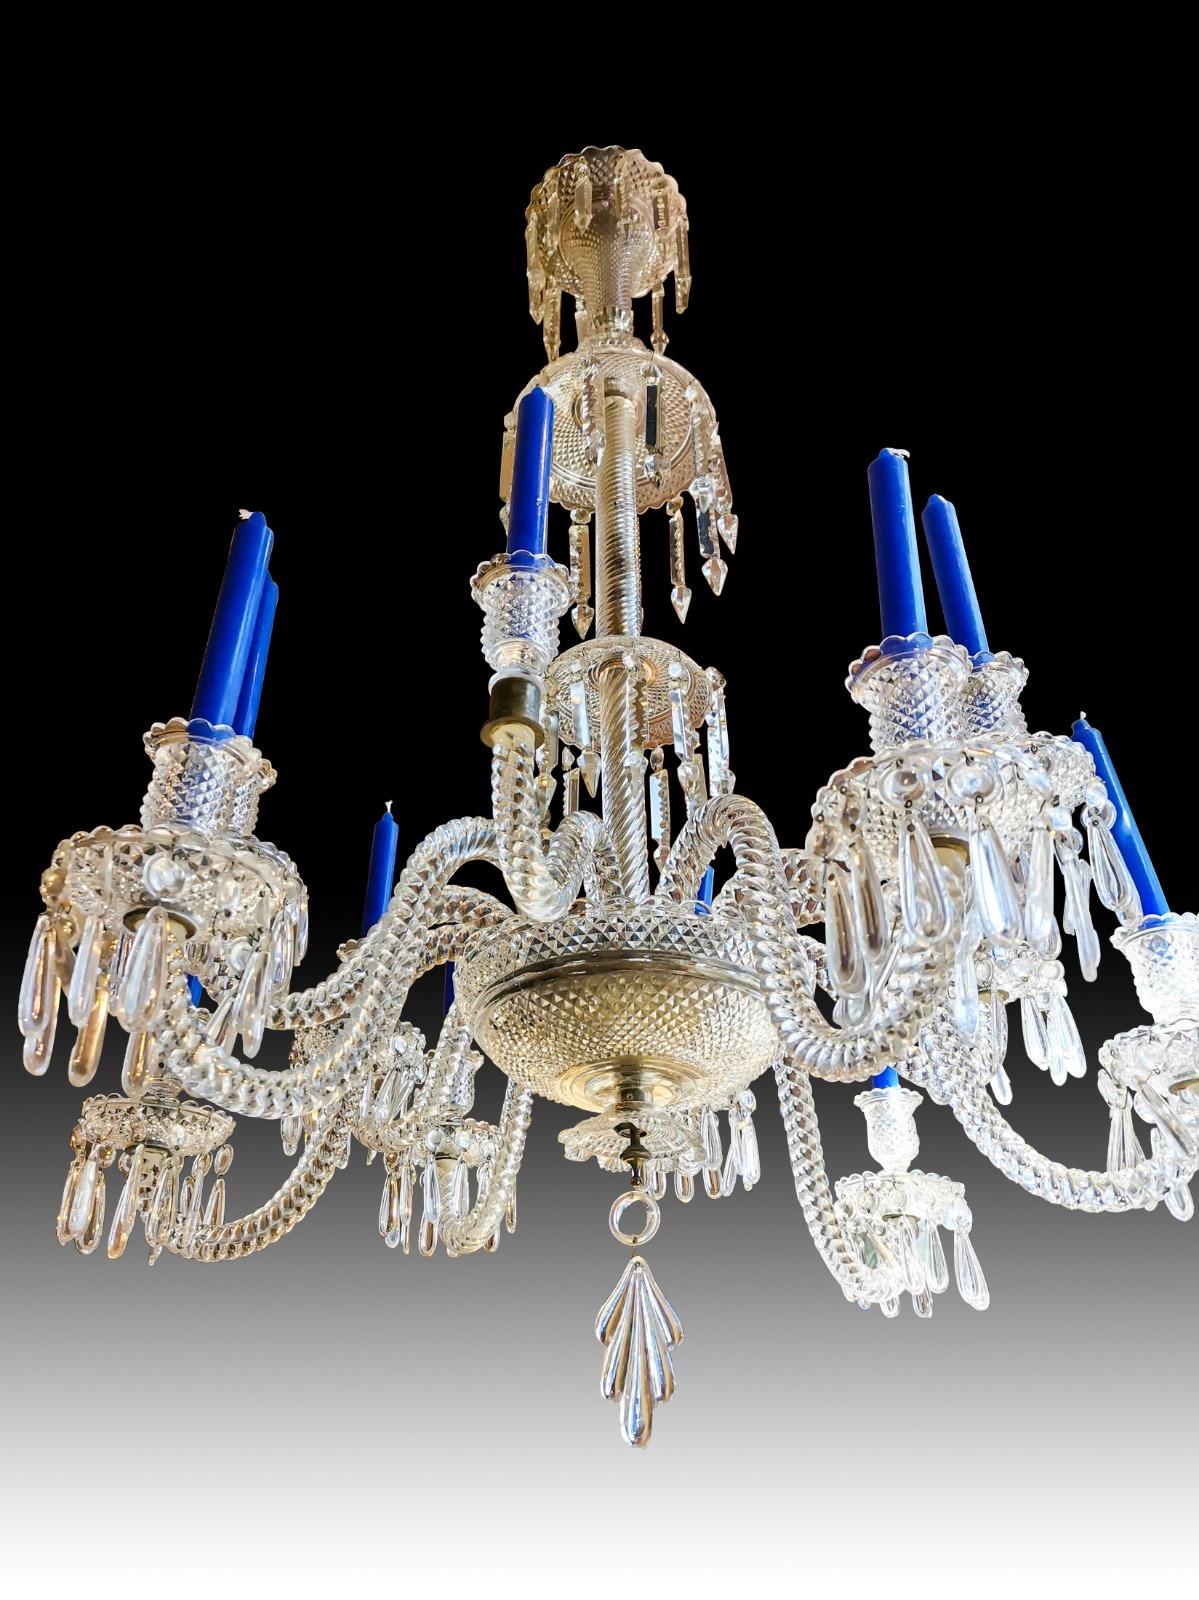 Crystal Chandelier Baccarat with 12 Arms Finely Decorated with Pearls, 19th Cen For Sale 4